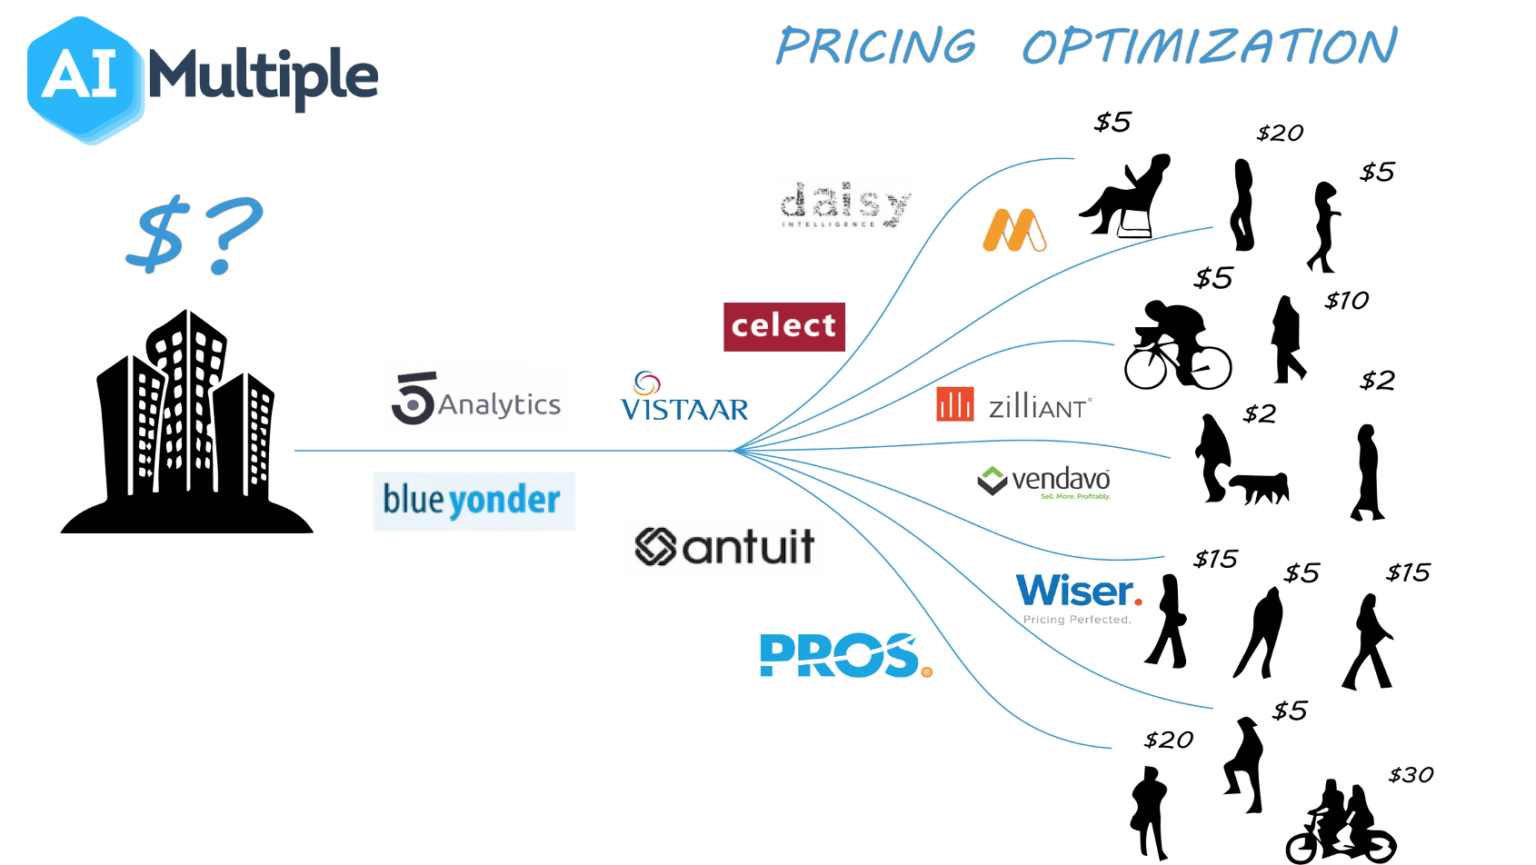 does dynamic pricing typically benefits consumers